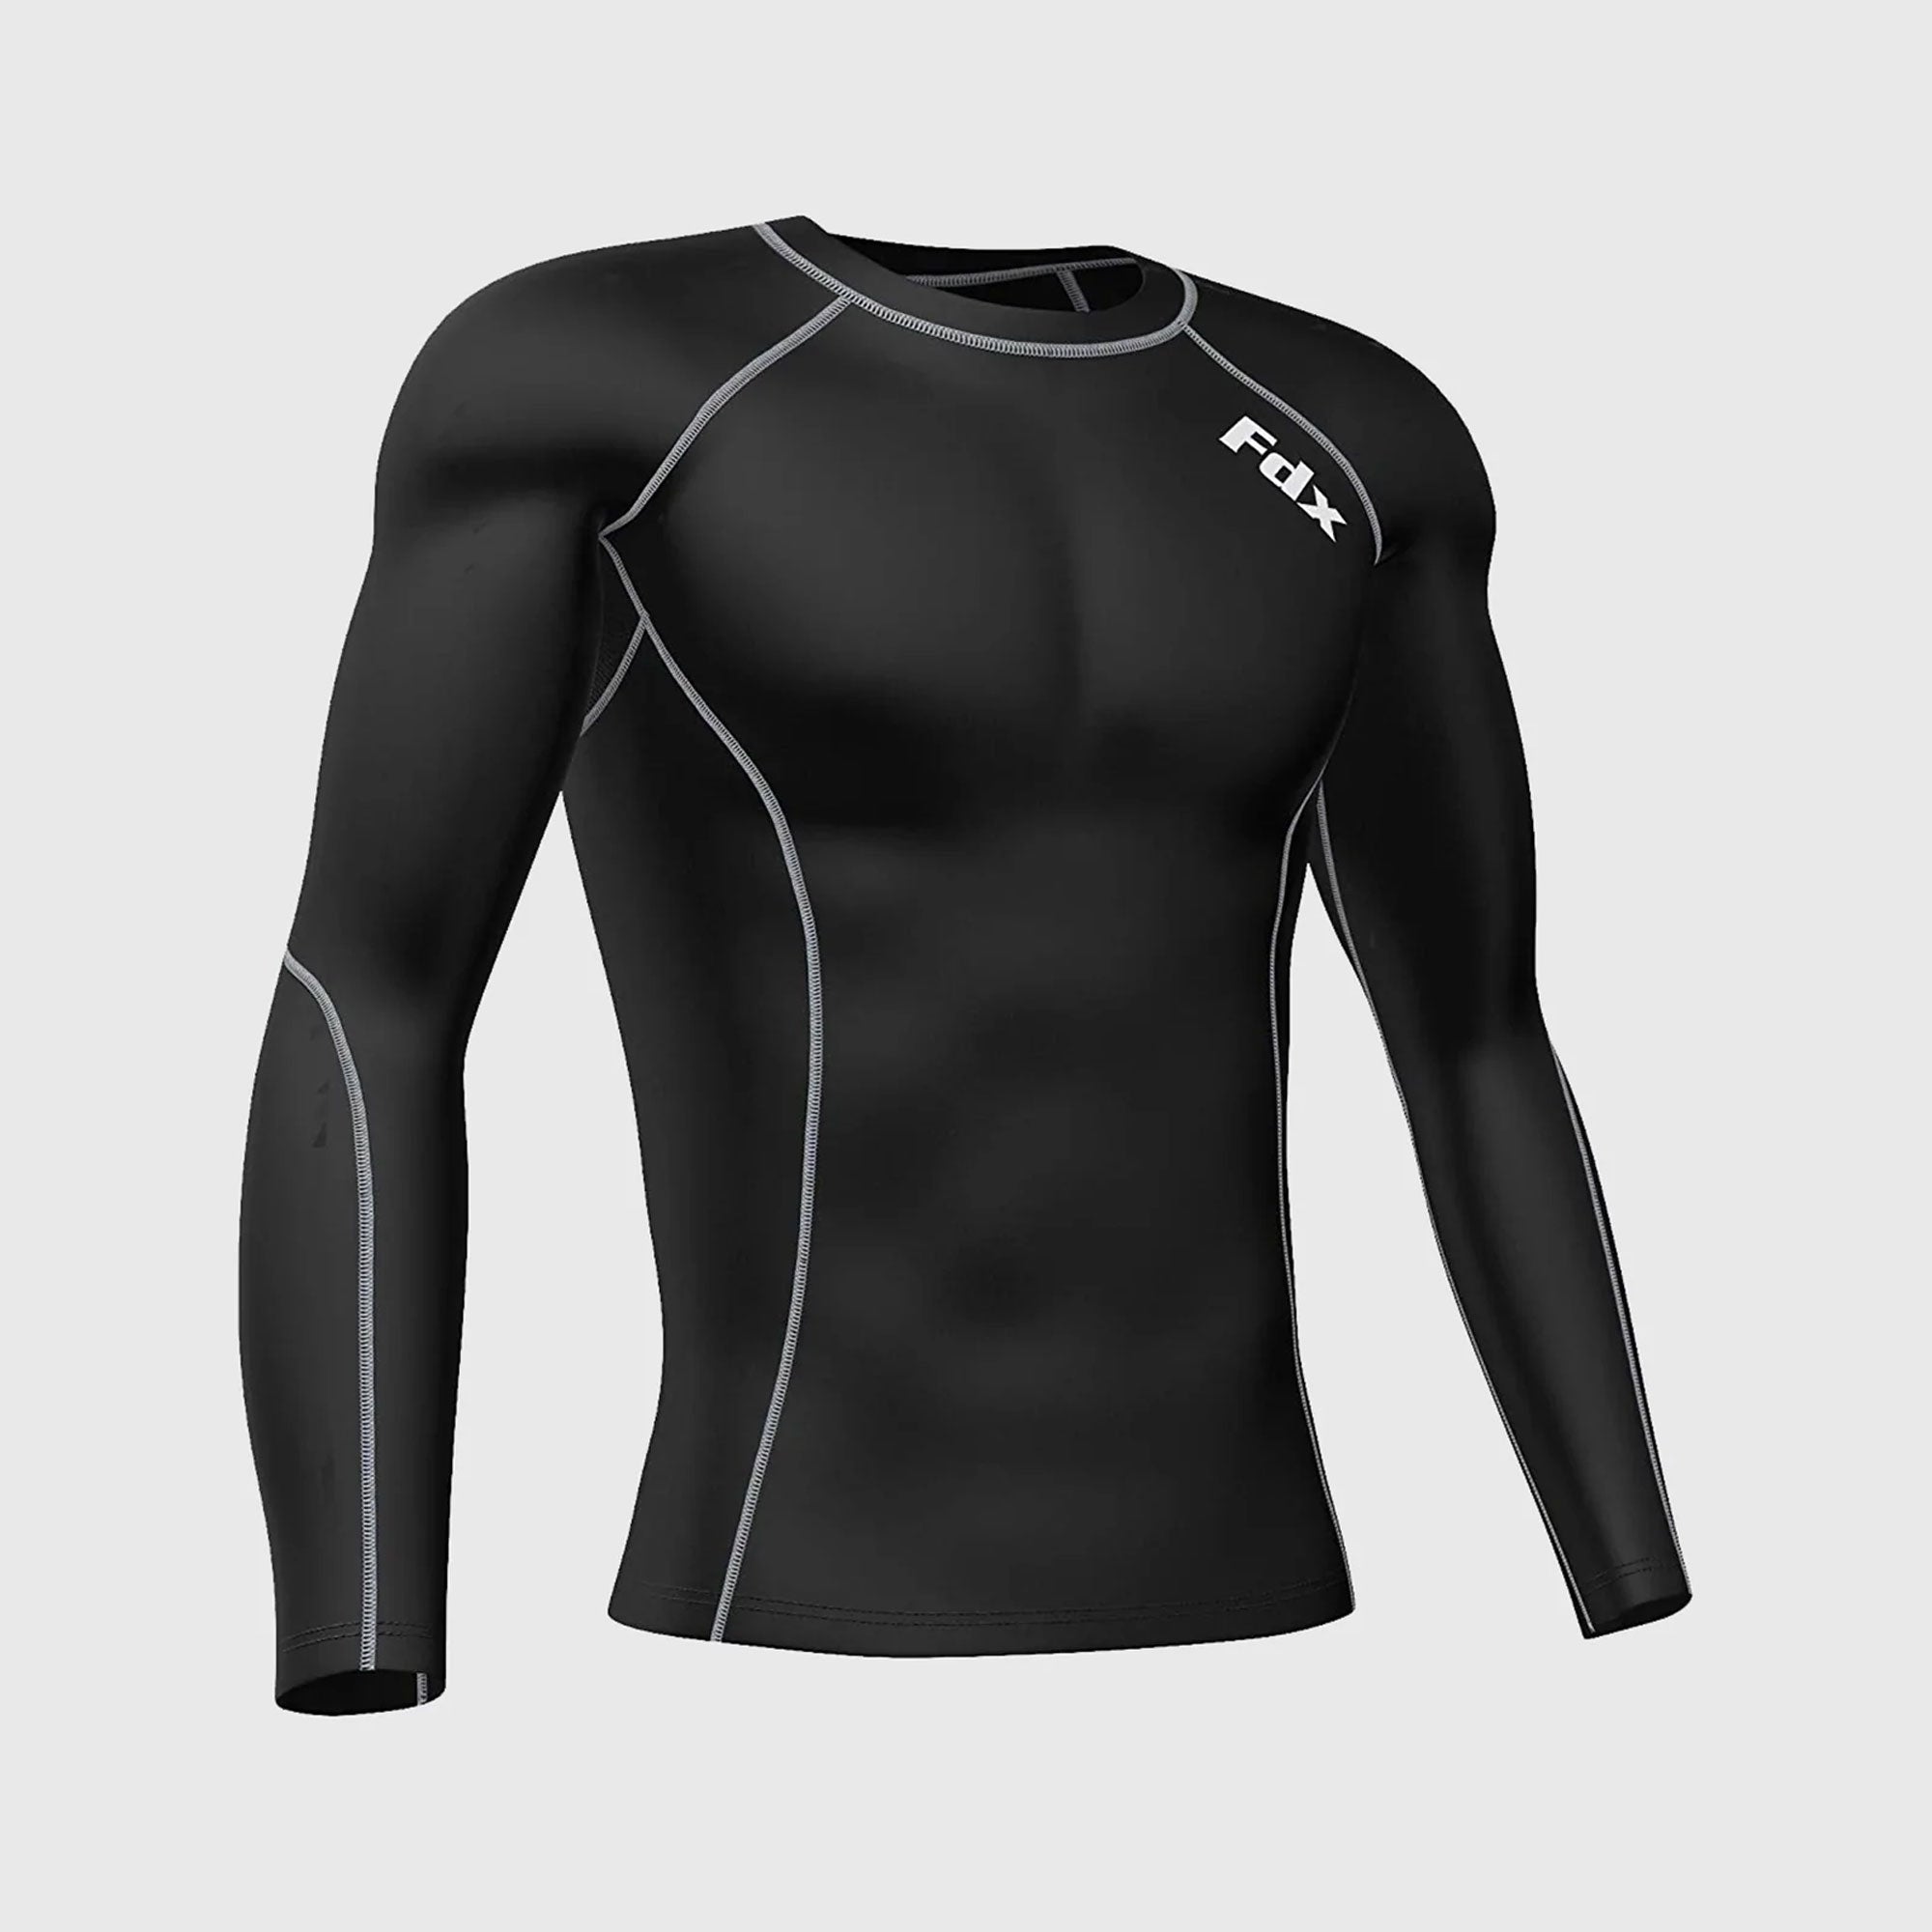 Fdx Mens Black & Grey Long Sleeve Compression Top Running Gym Workout Wear Rash Guard Stretchable Breathable - Blitz